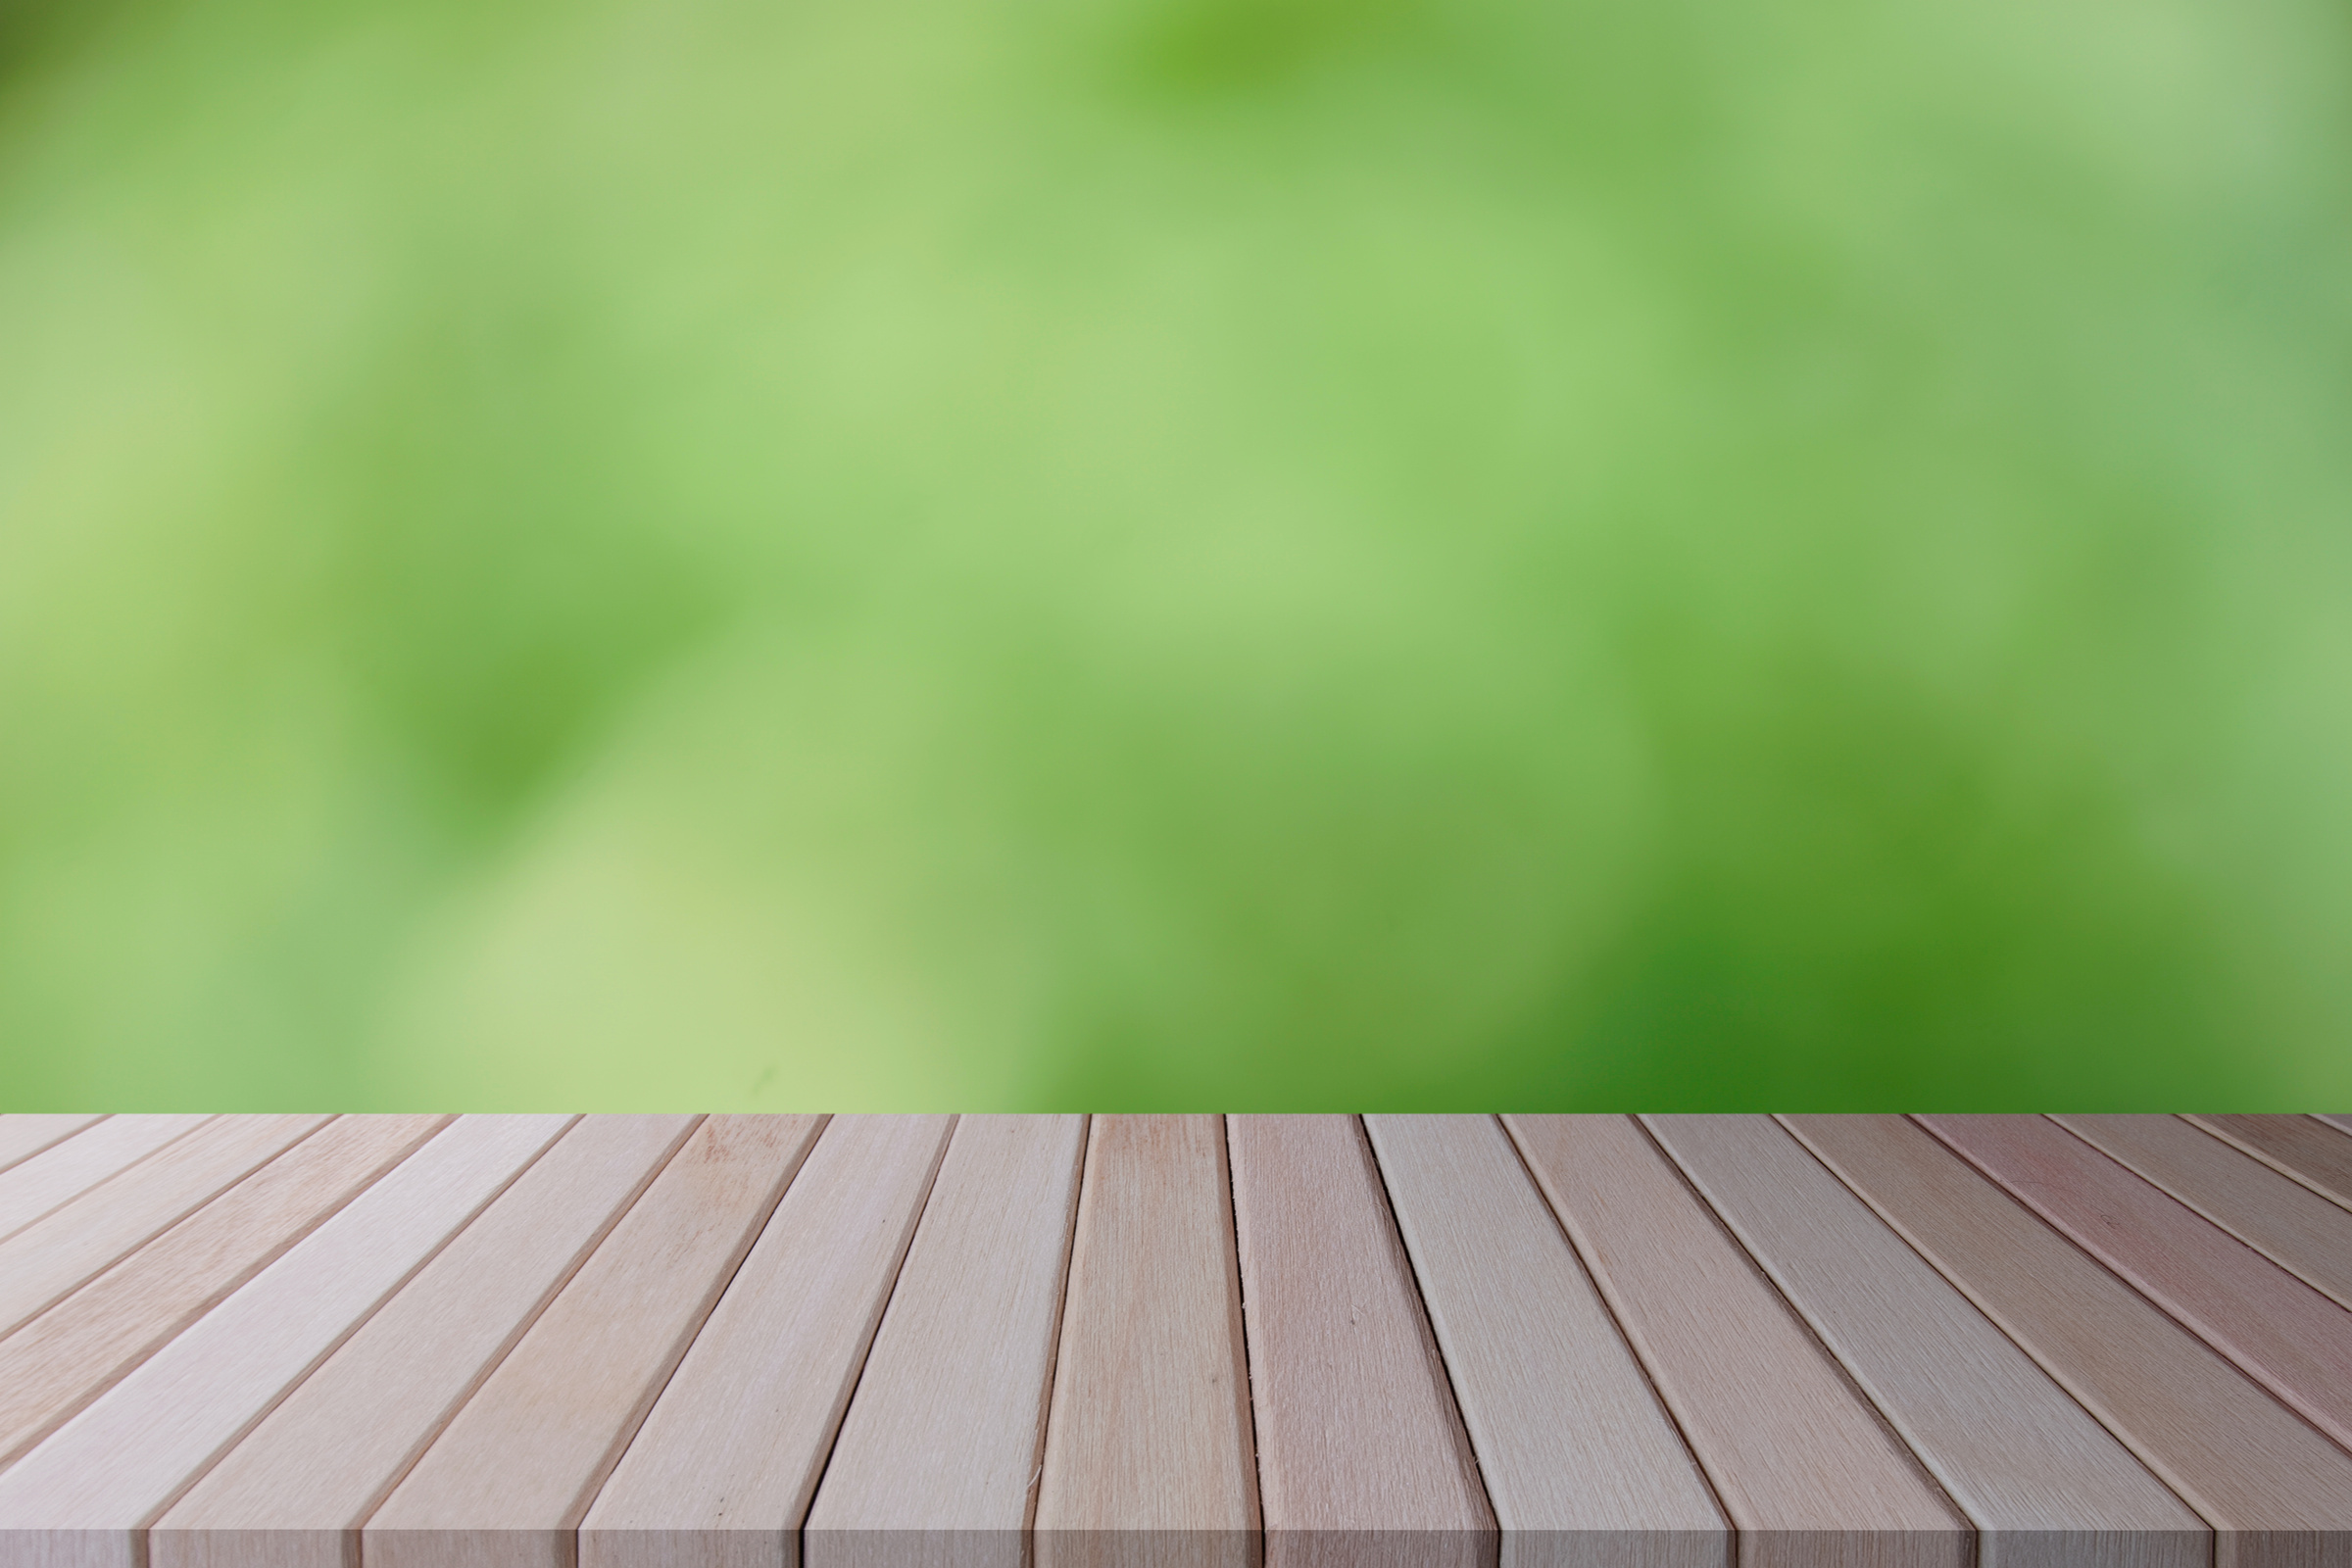 Wooden Table on Blurred Nature Background